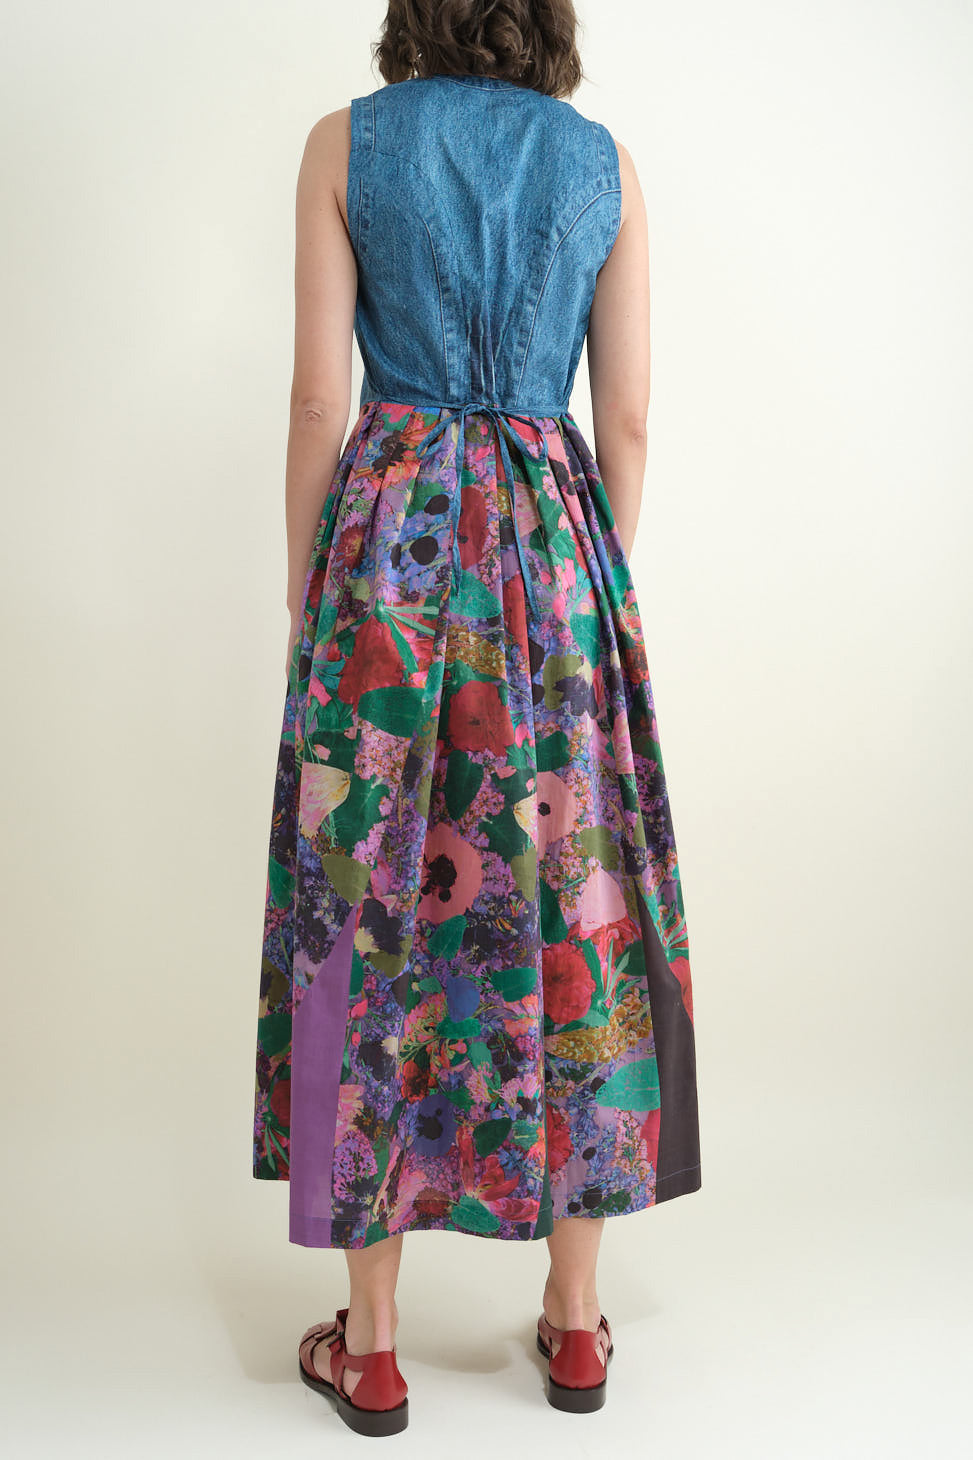 Back of Sleeveless Dress in Jeans and Flowers